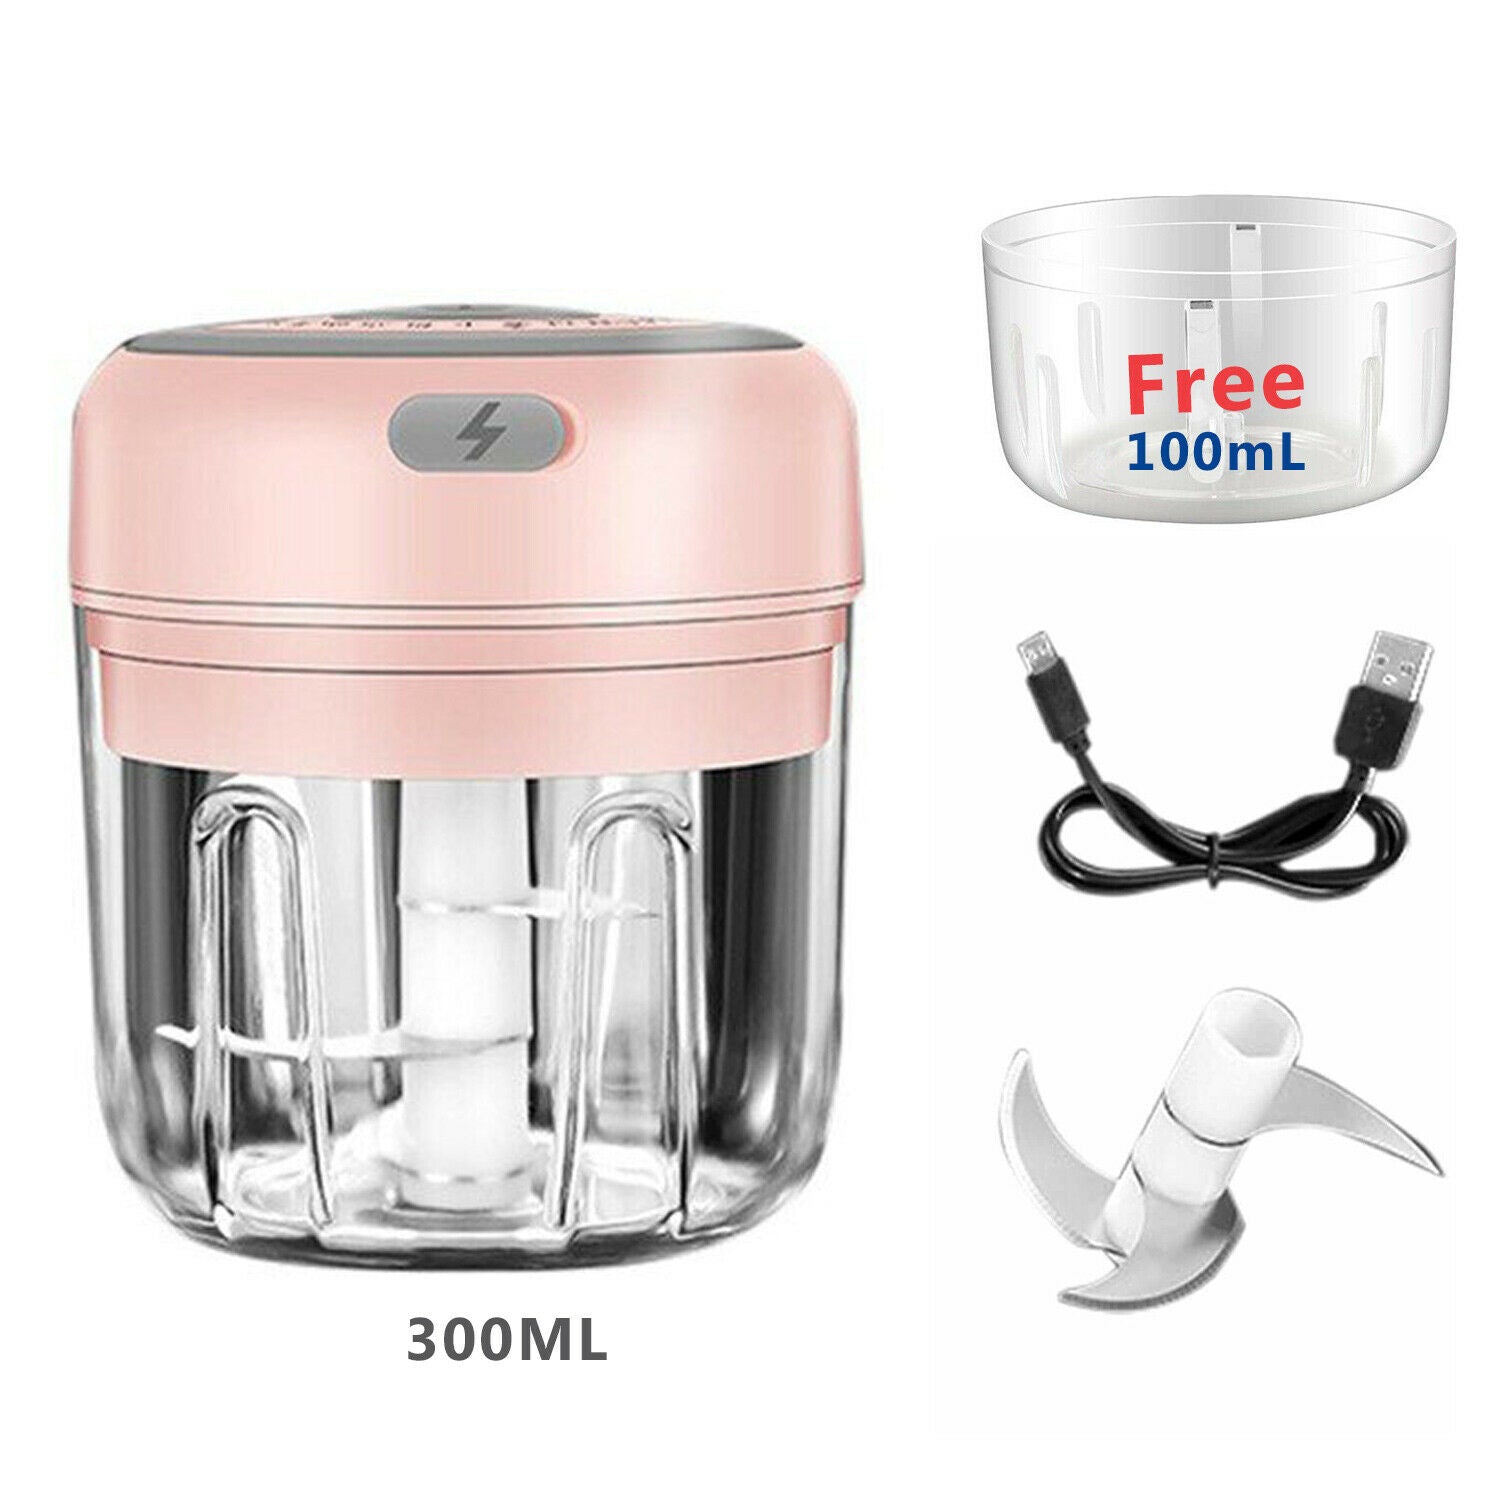 Electric 300ML Garlic Press, Meat Mincer, Blender And Mixer With 100ML